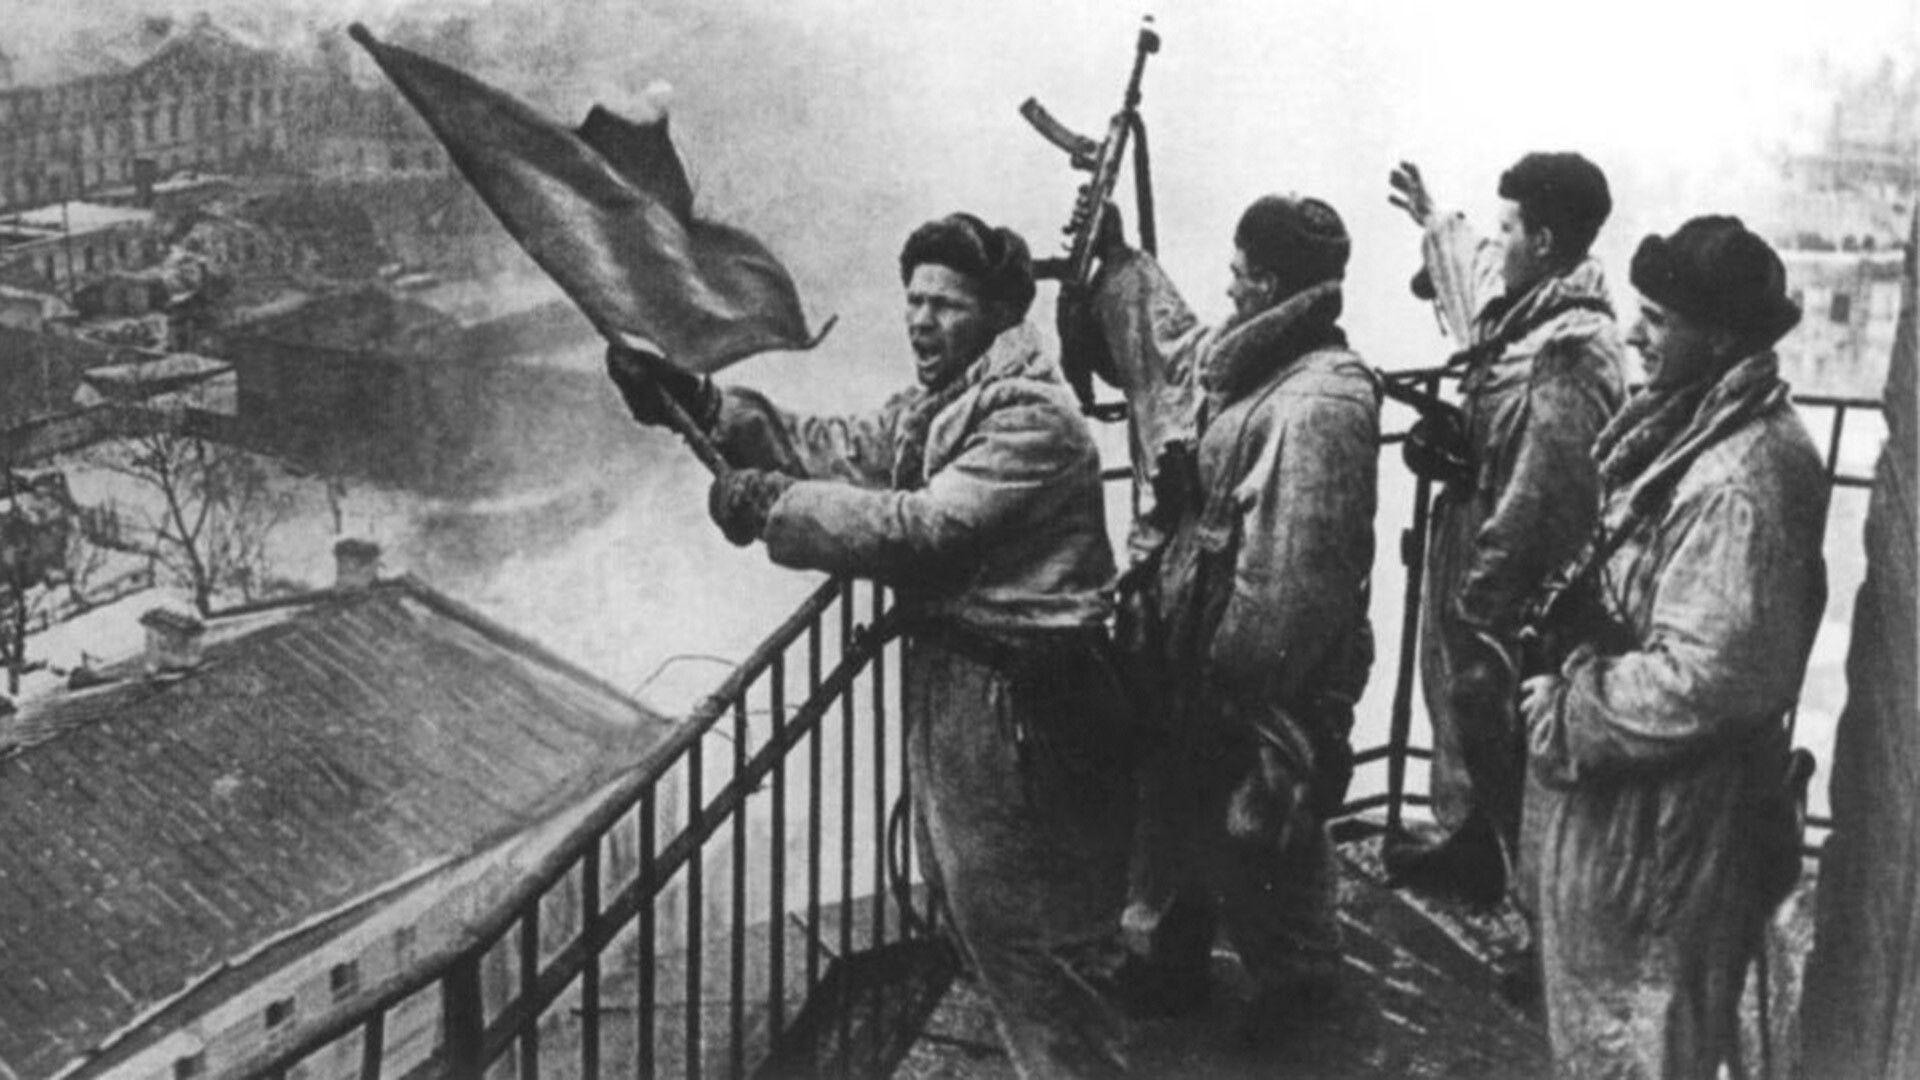 Soviet soldiers hoisting a red flag over the liberated town of Gatchina near Leningrad, January 26, 1944.